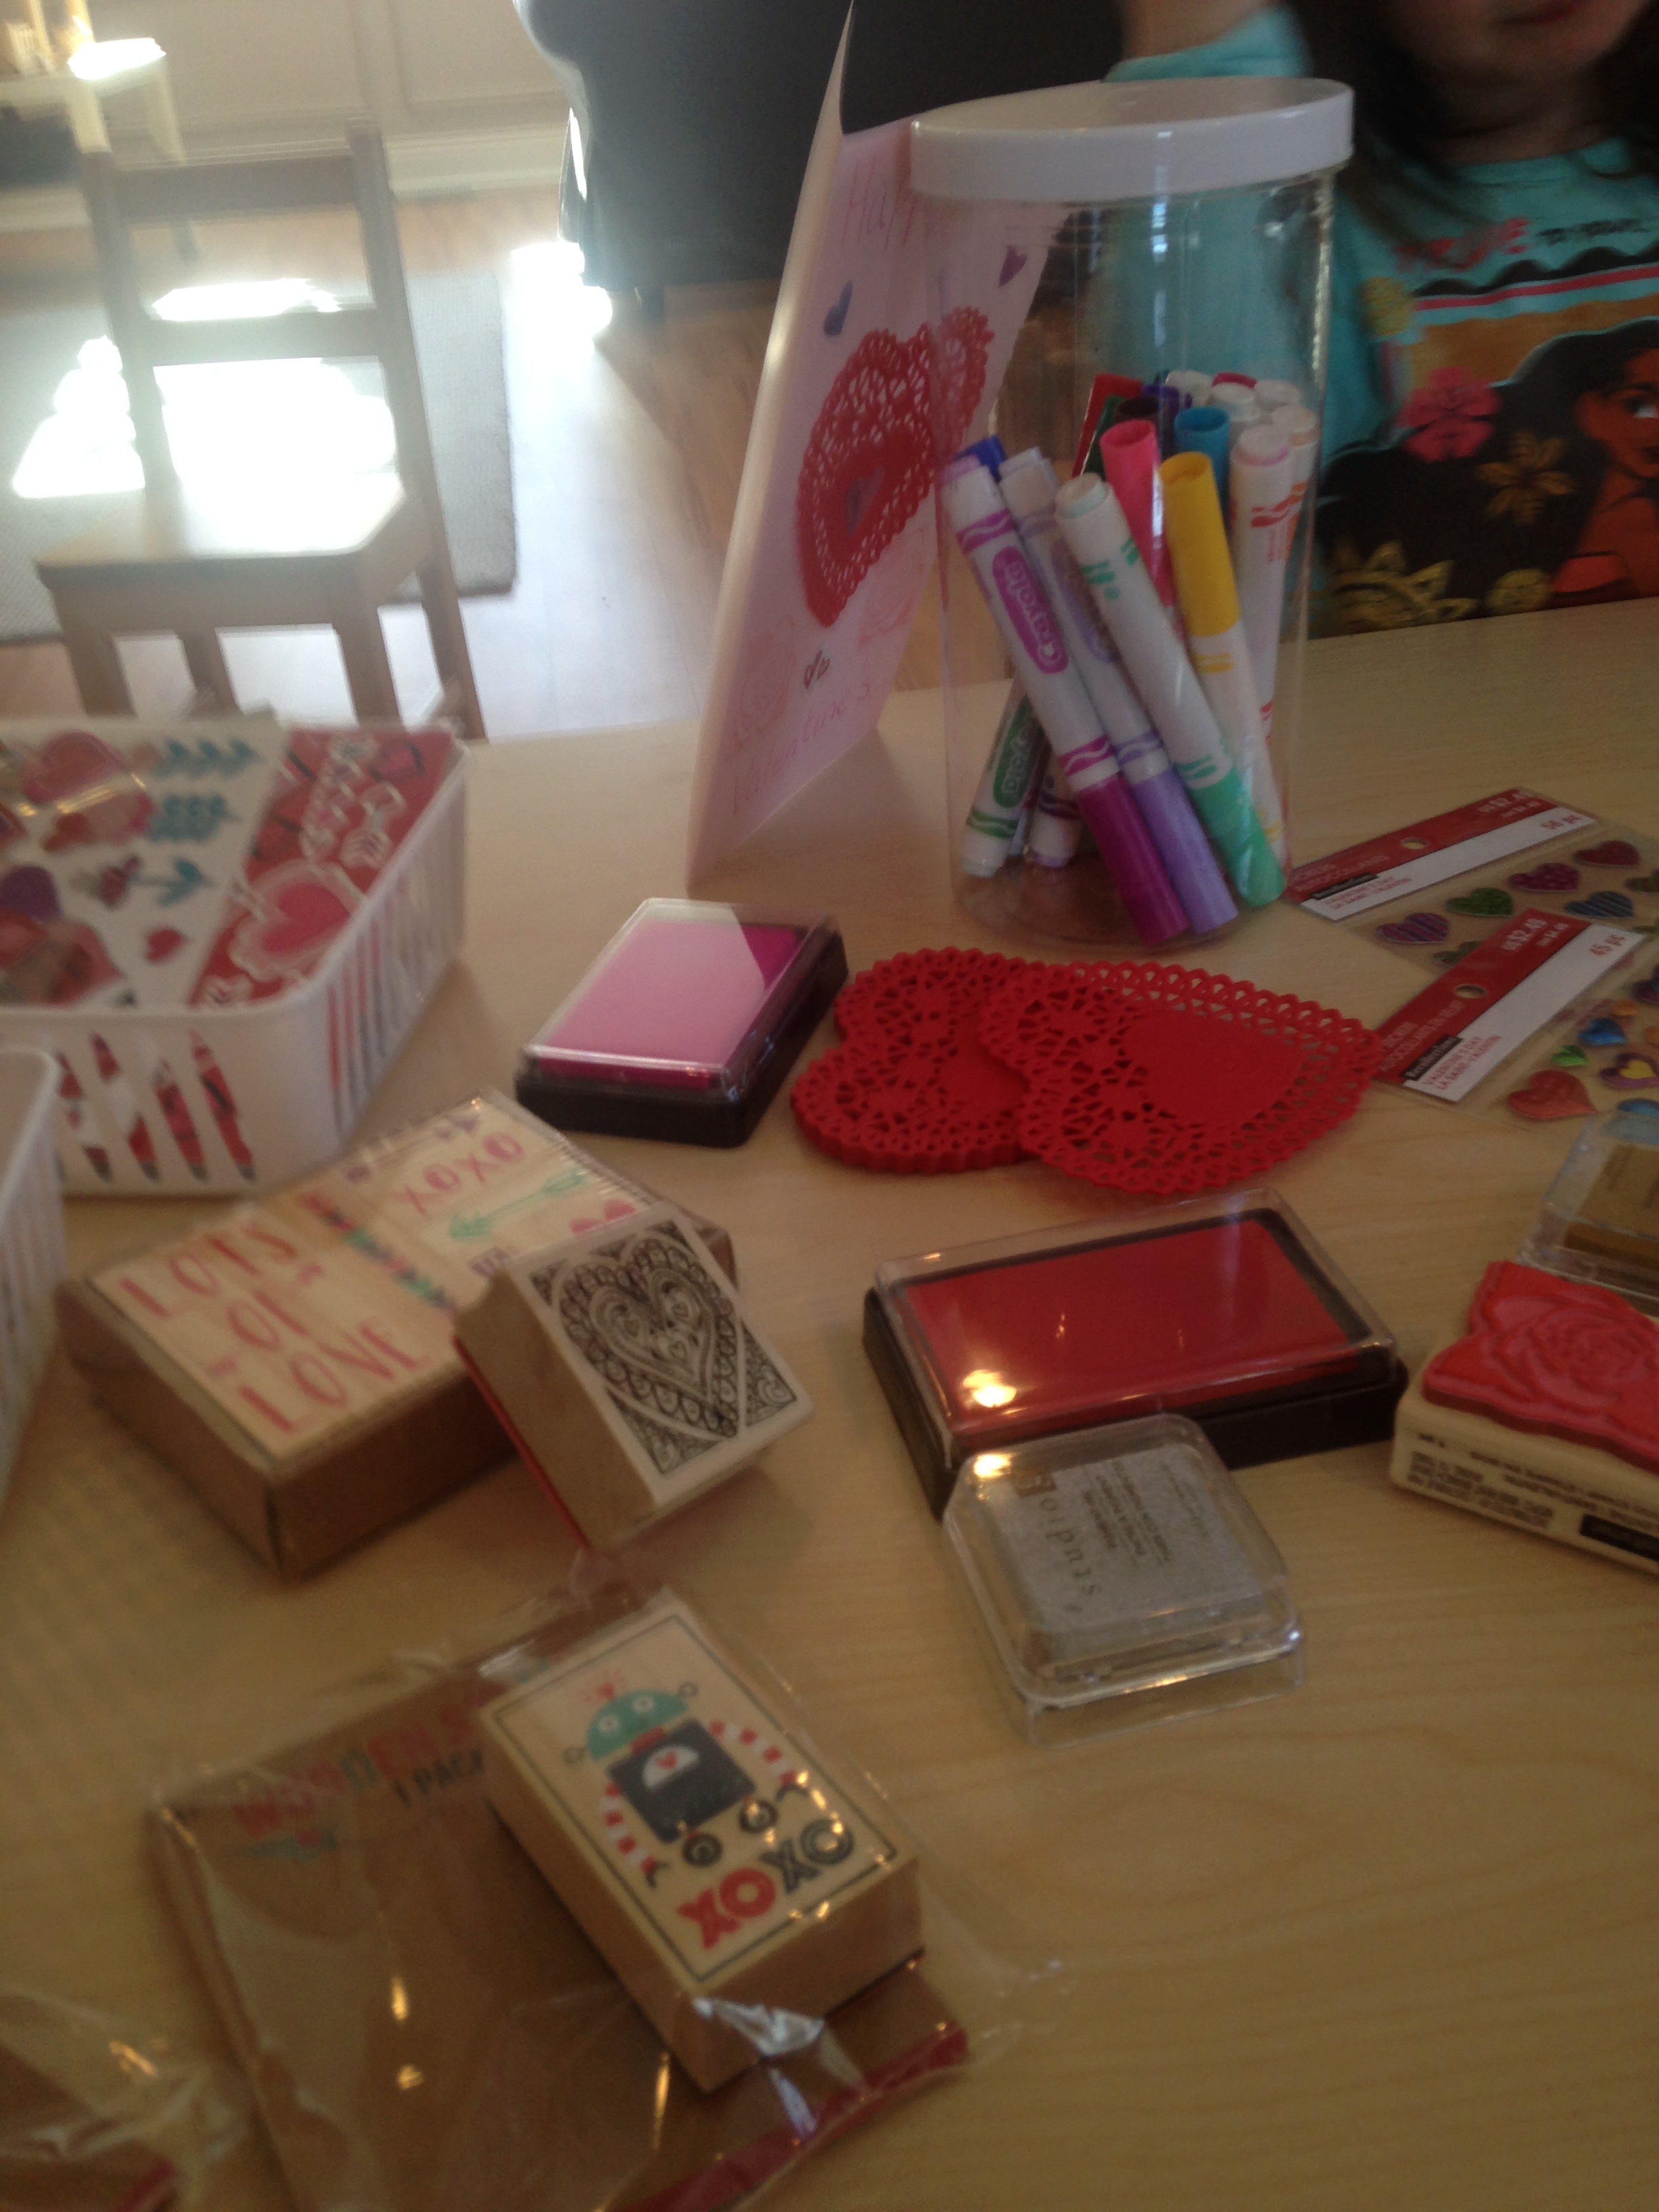 Lots of fancy supplies were available as the children created their cards!